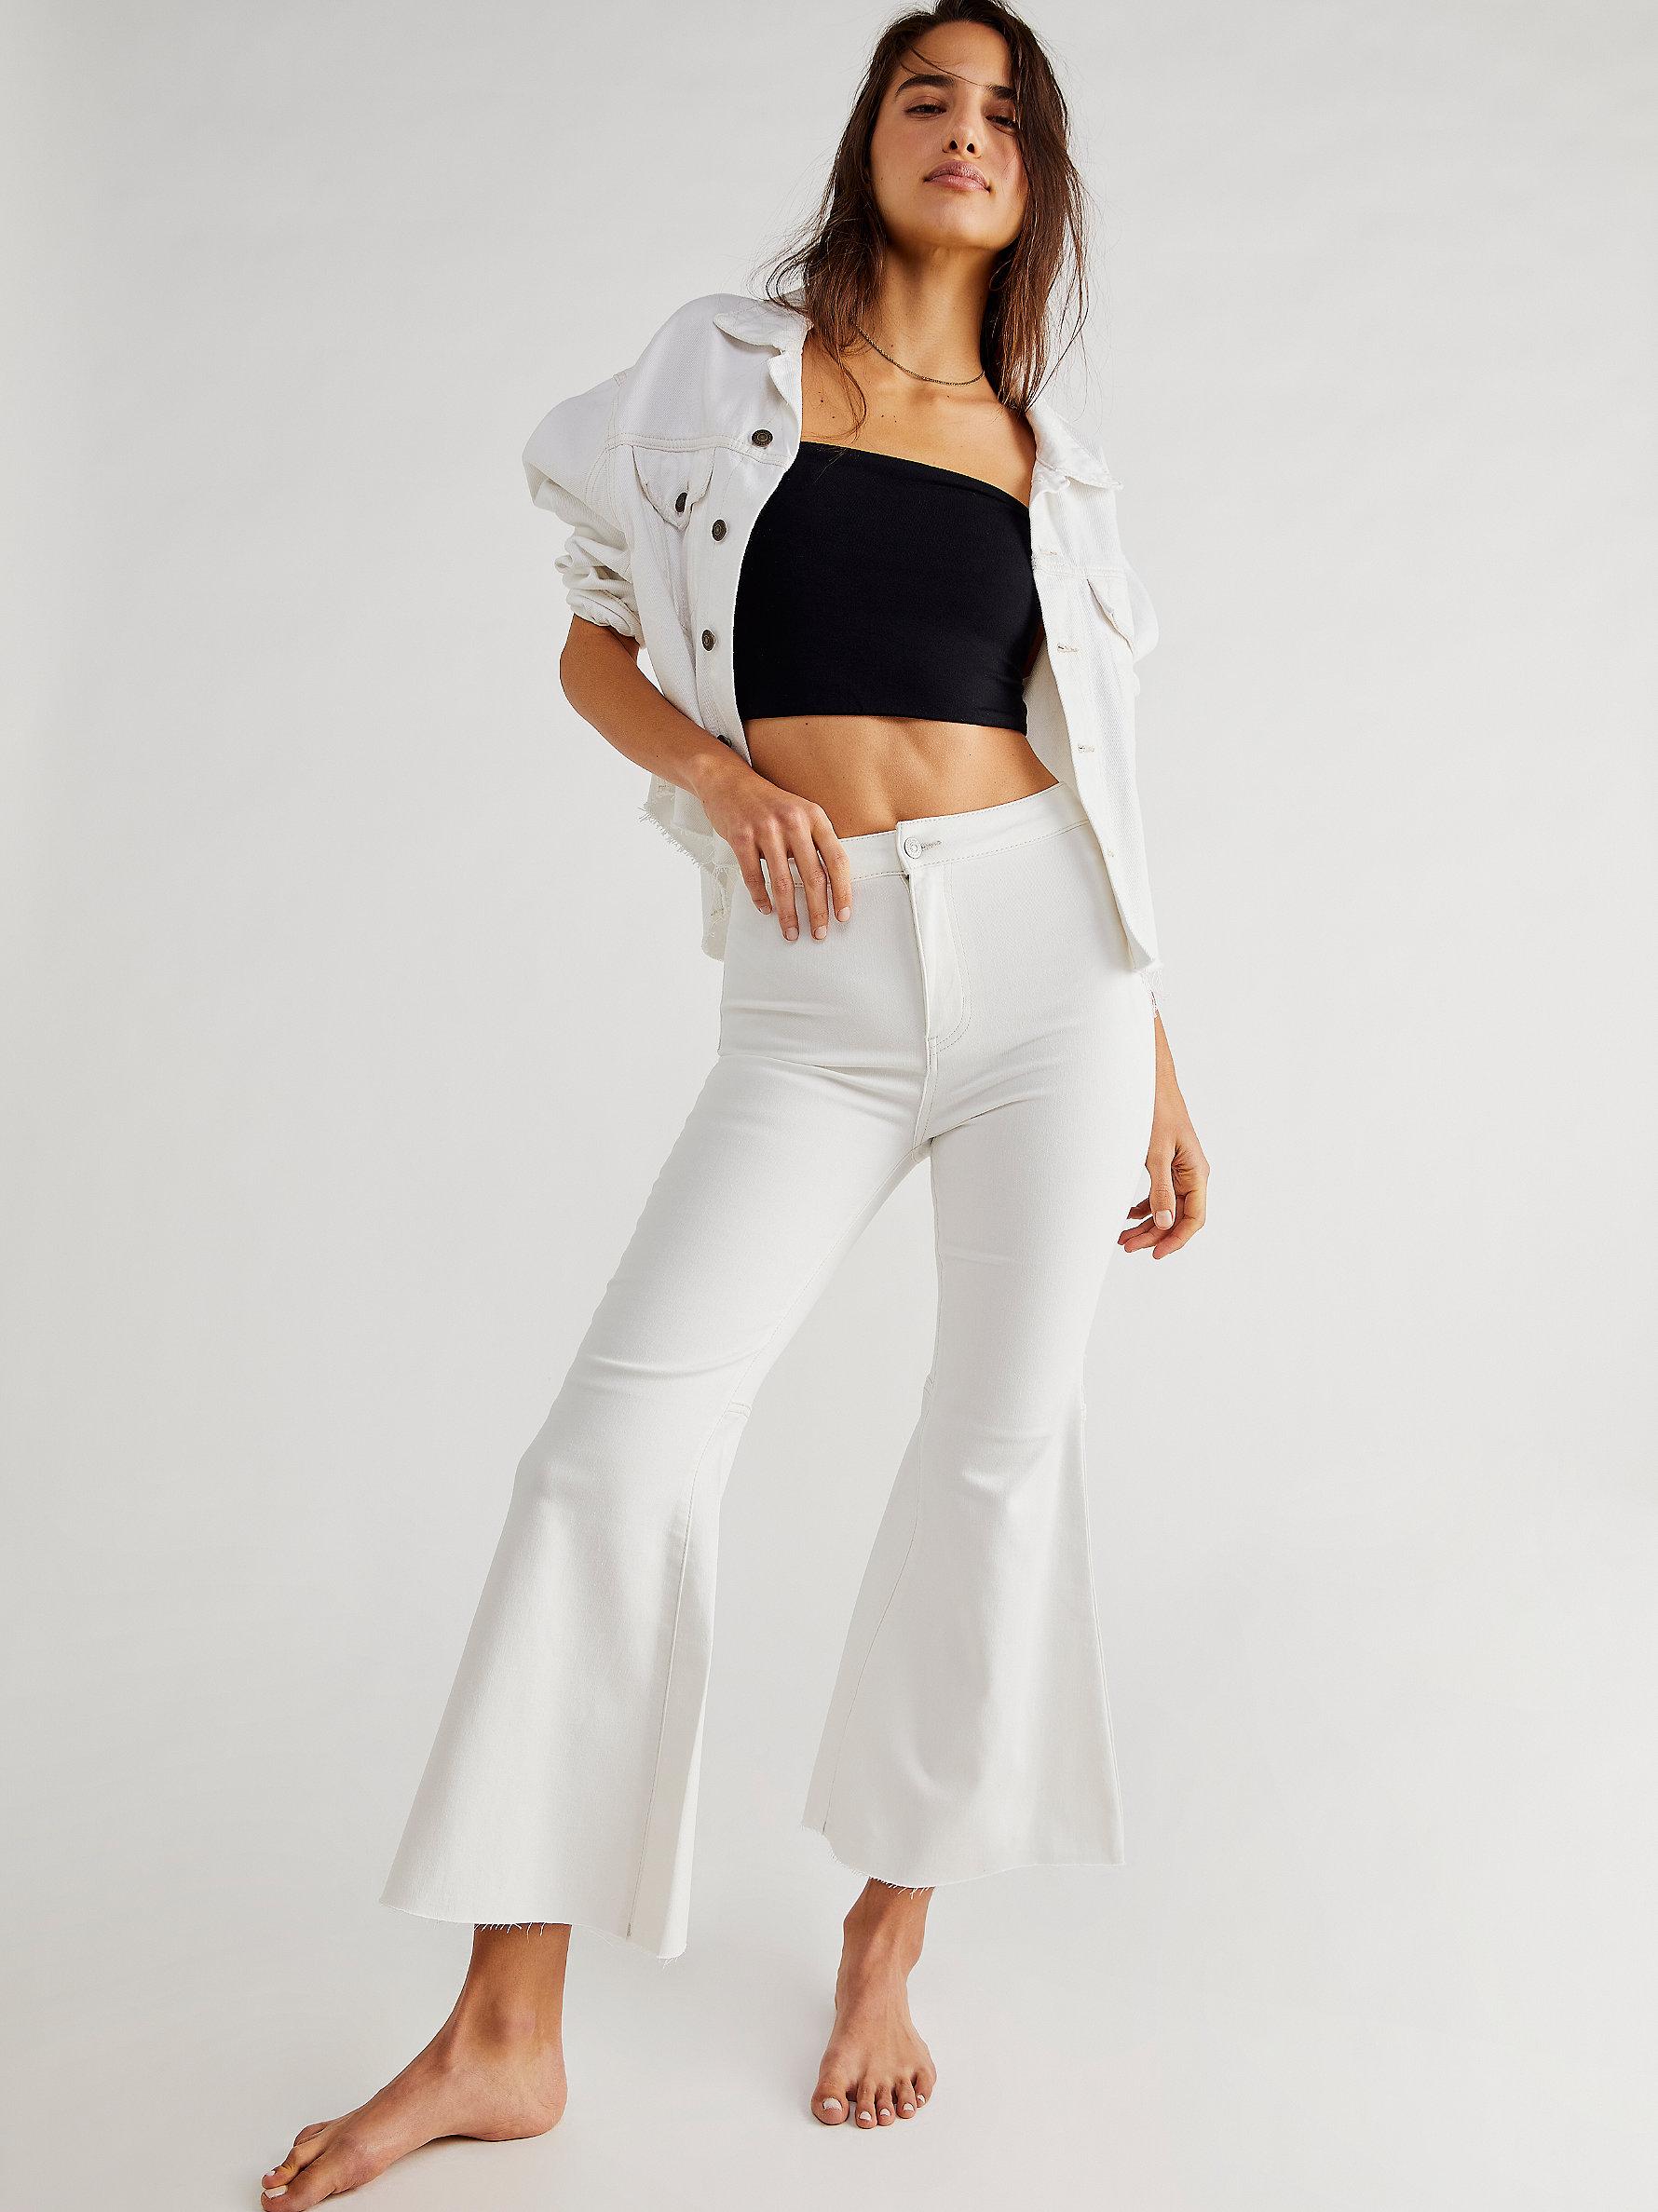 Derde stem Straat Free People Youthquake Crop Flare Jeans in White | Lyst